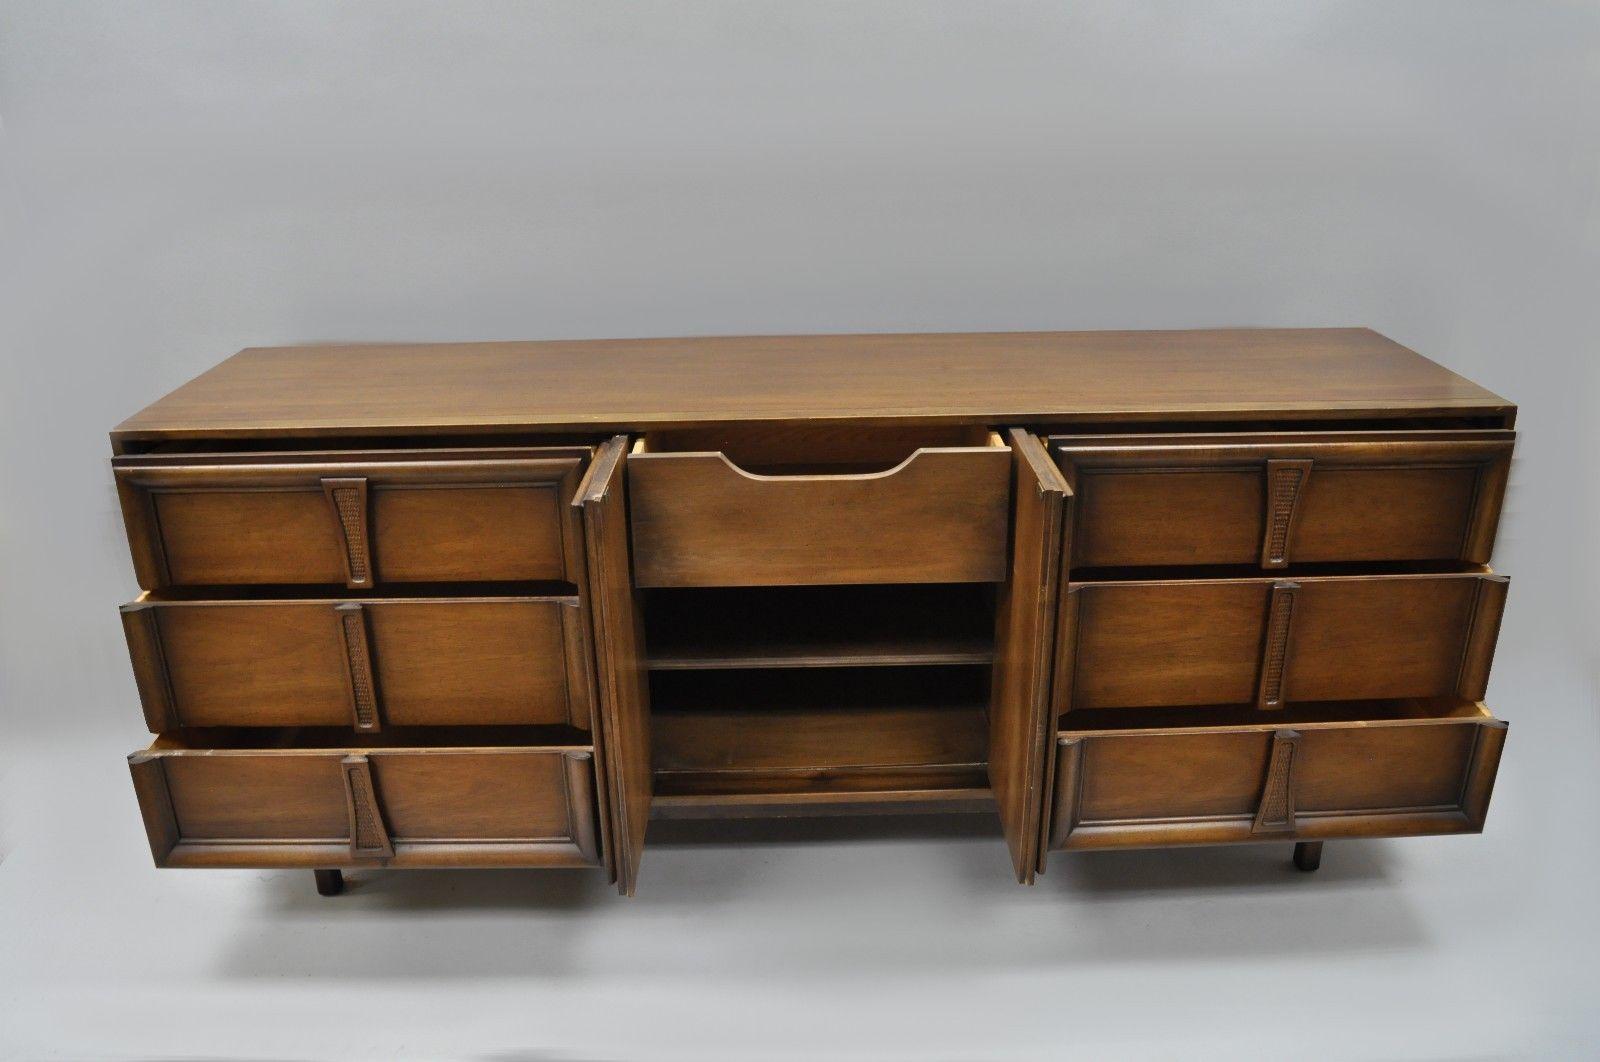 Vintage walnut long dresser, Pacer Collection by Drexel Furniture. Item features beautiful woodgrain, two swing doors, seven dovetailed drawers, one wooden shelf, serial number to rear, clean Modernist lines, and plenty of storage, circa 1960s, USA.